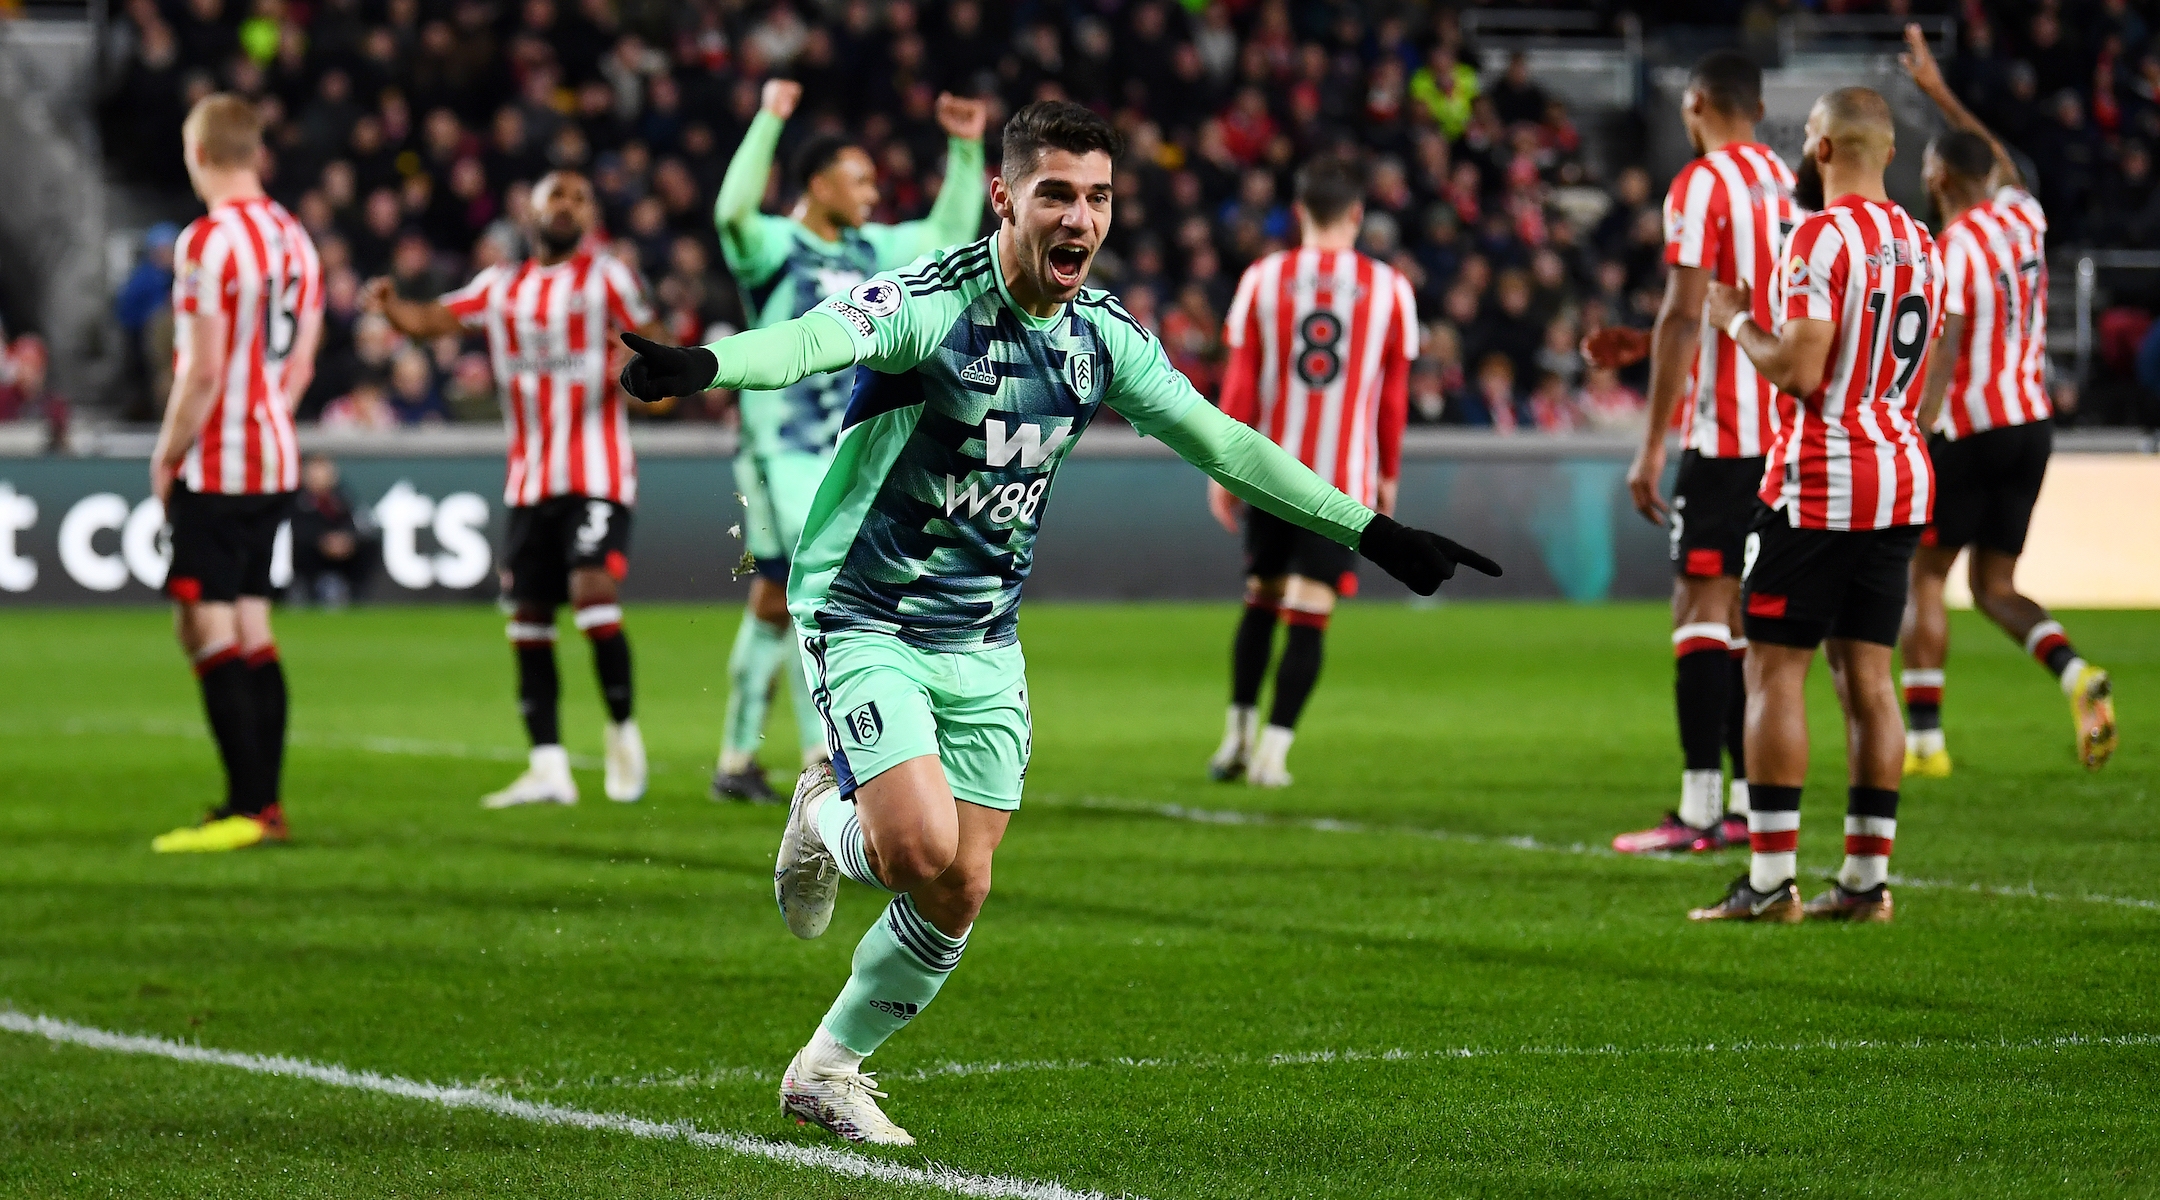 Manor Solomon celebrates after scoring a goal during the Premier League match between Brentford FC and Fulham FC, March 6, 2023. (Alex Davidson/Getty Images)